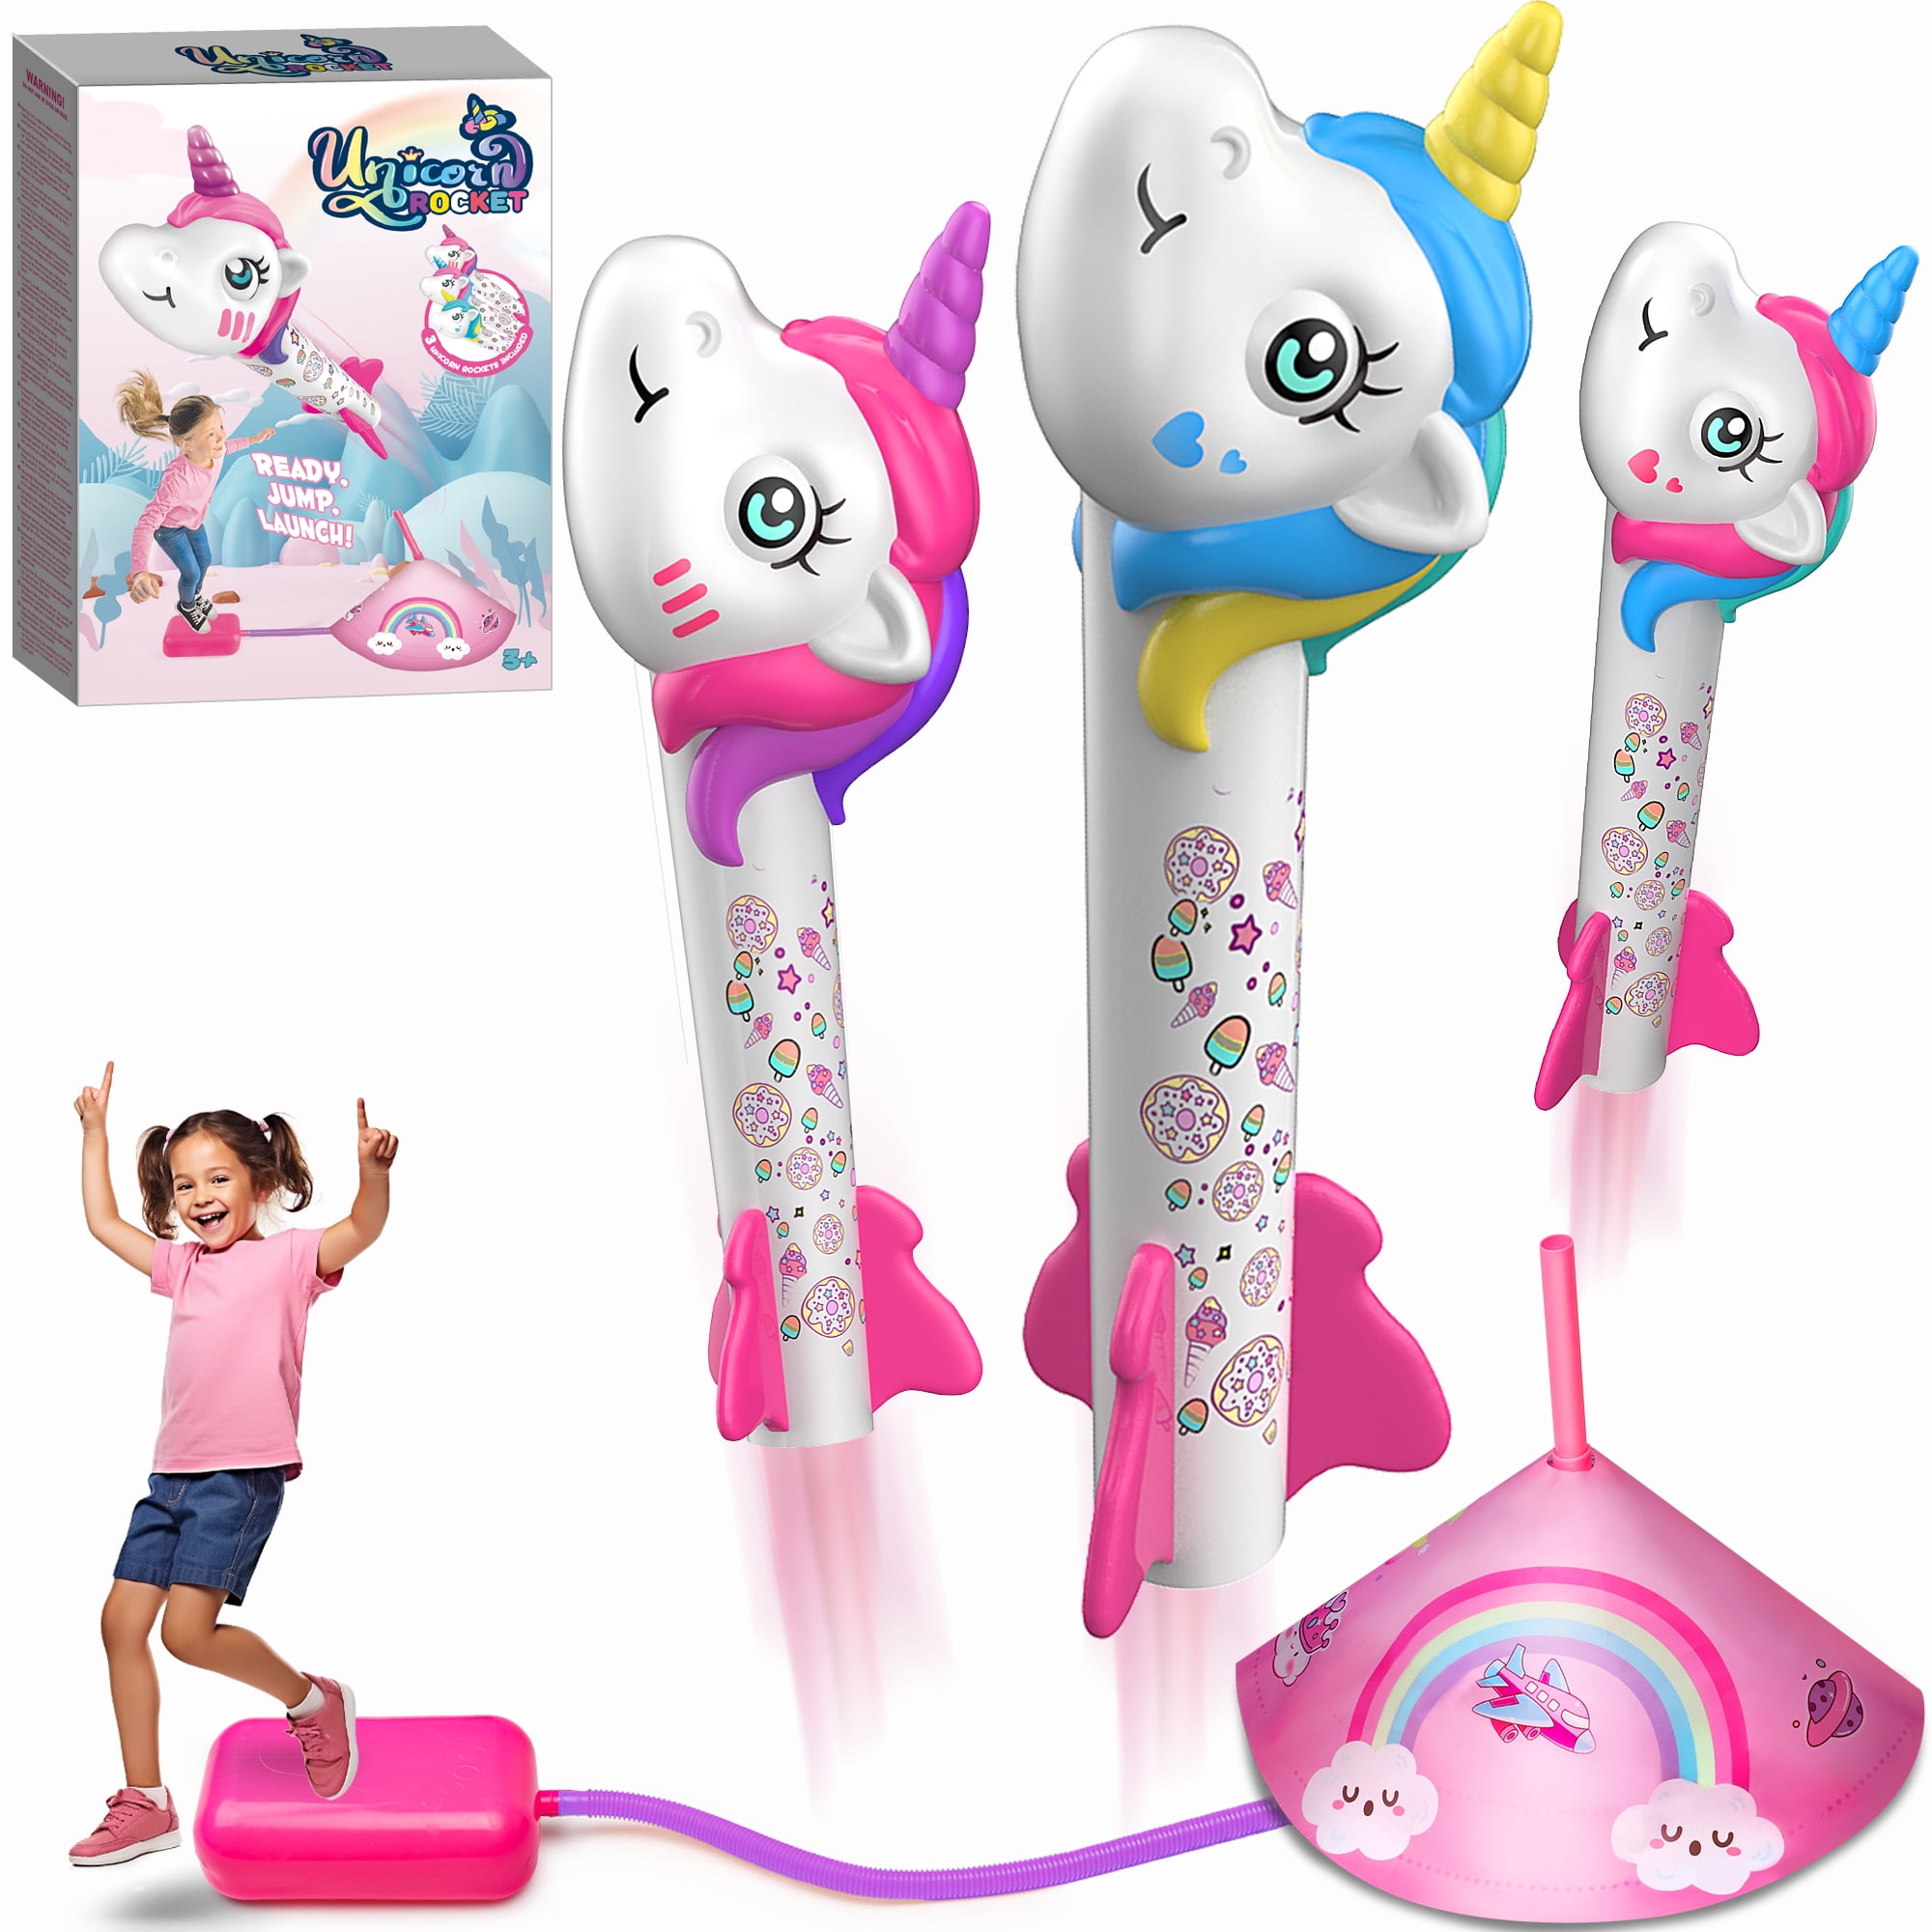  IPOURUP Unicorn Rocket Launcher Outdoor Toys for Girls for 3 4  5 6 7 8 9 10 Year Old Girl Birthday Gift Outside Stomp Toy for Kids Ages 6-8  Fun Family Yard Game Toddler Gifts : Toys & Games